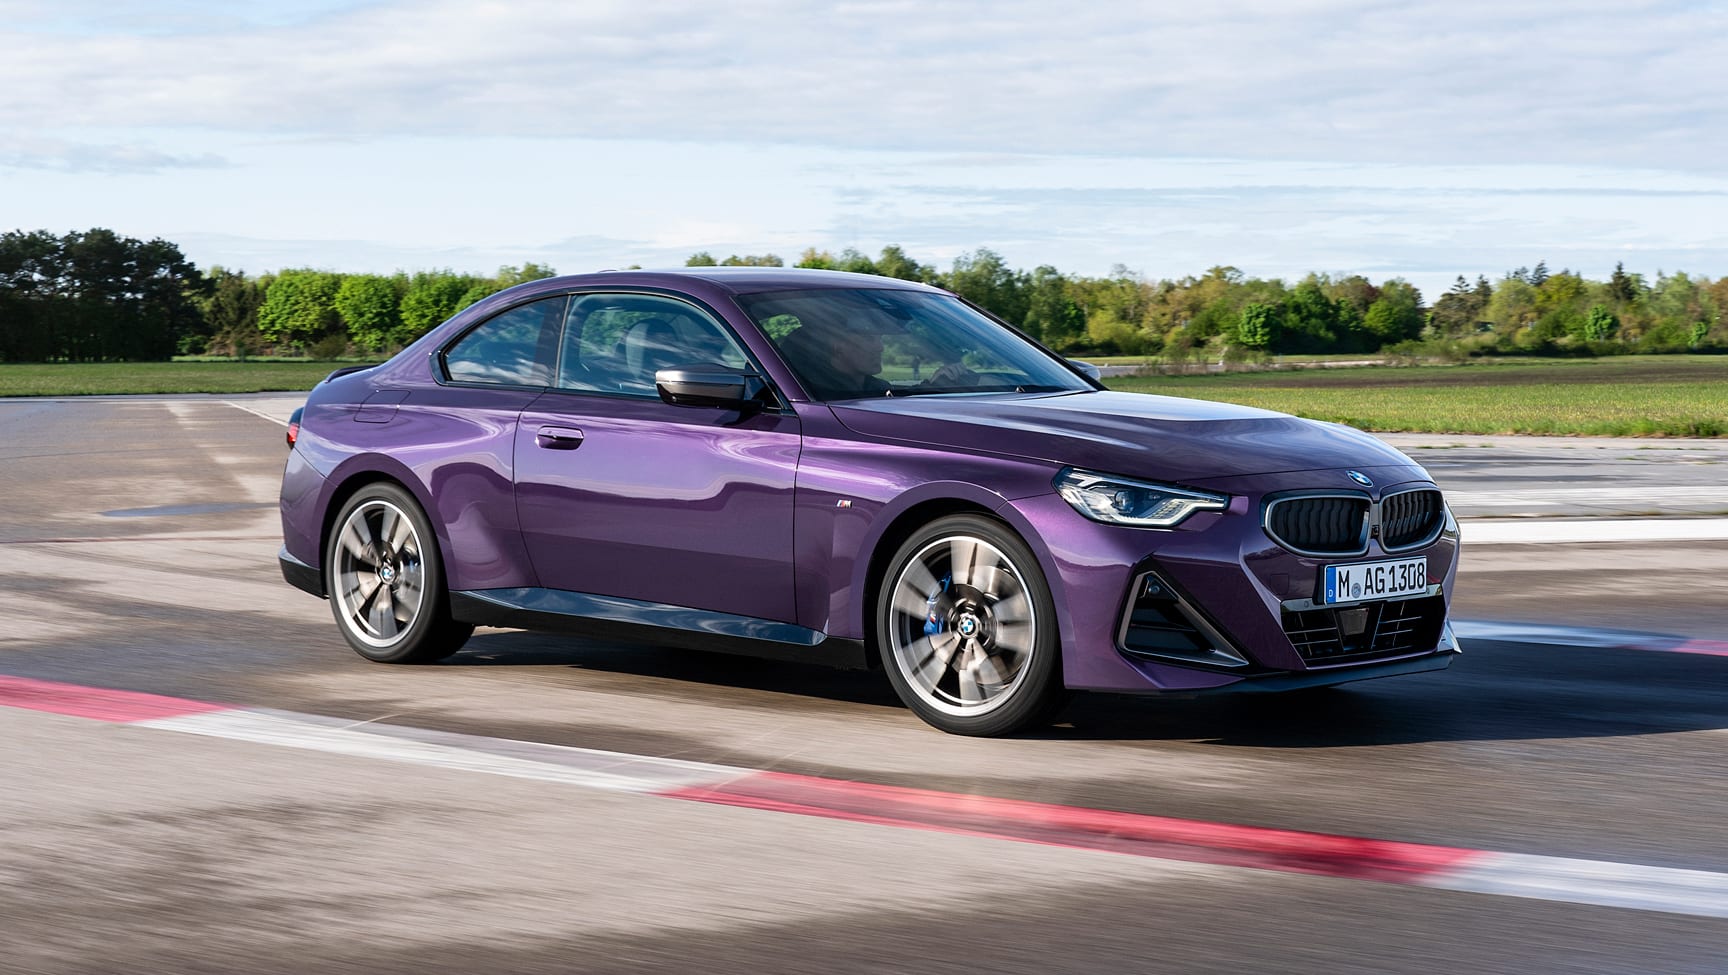 2022 BMW 2 Series Coupe price and features Performancefocused